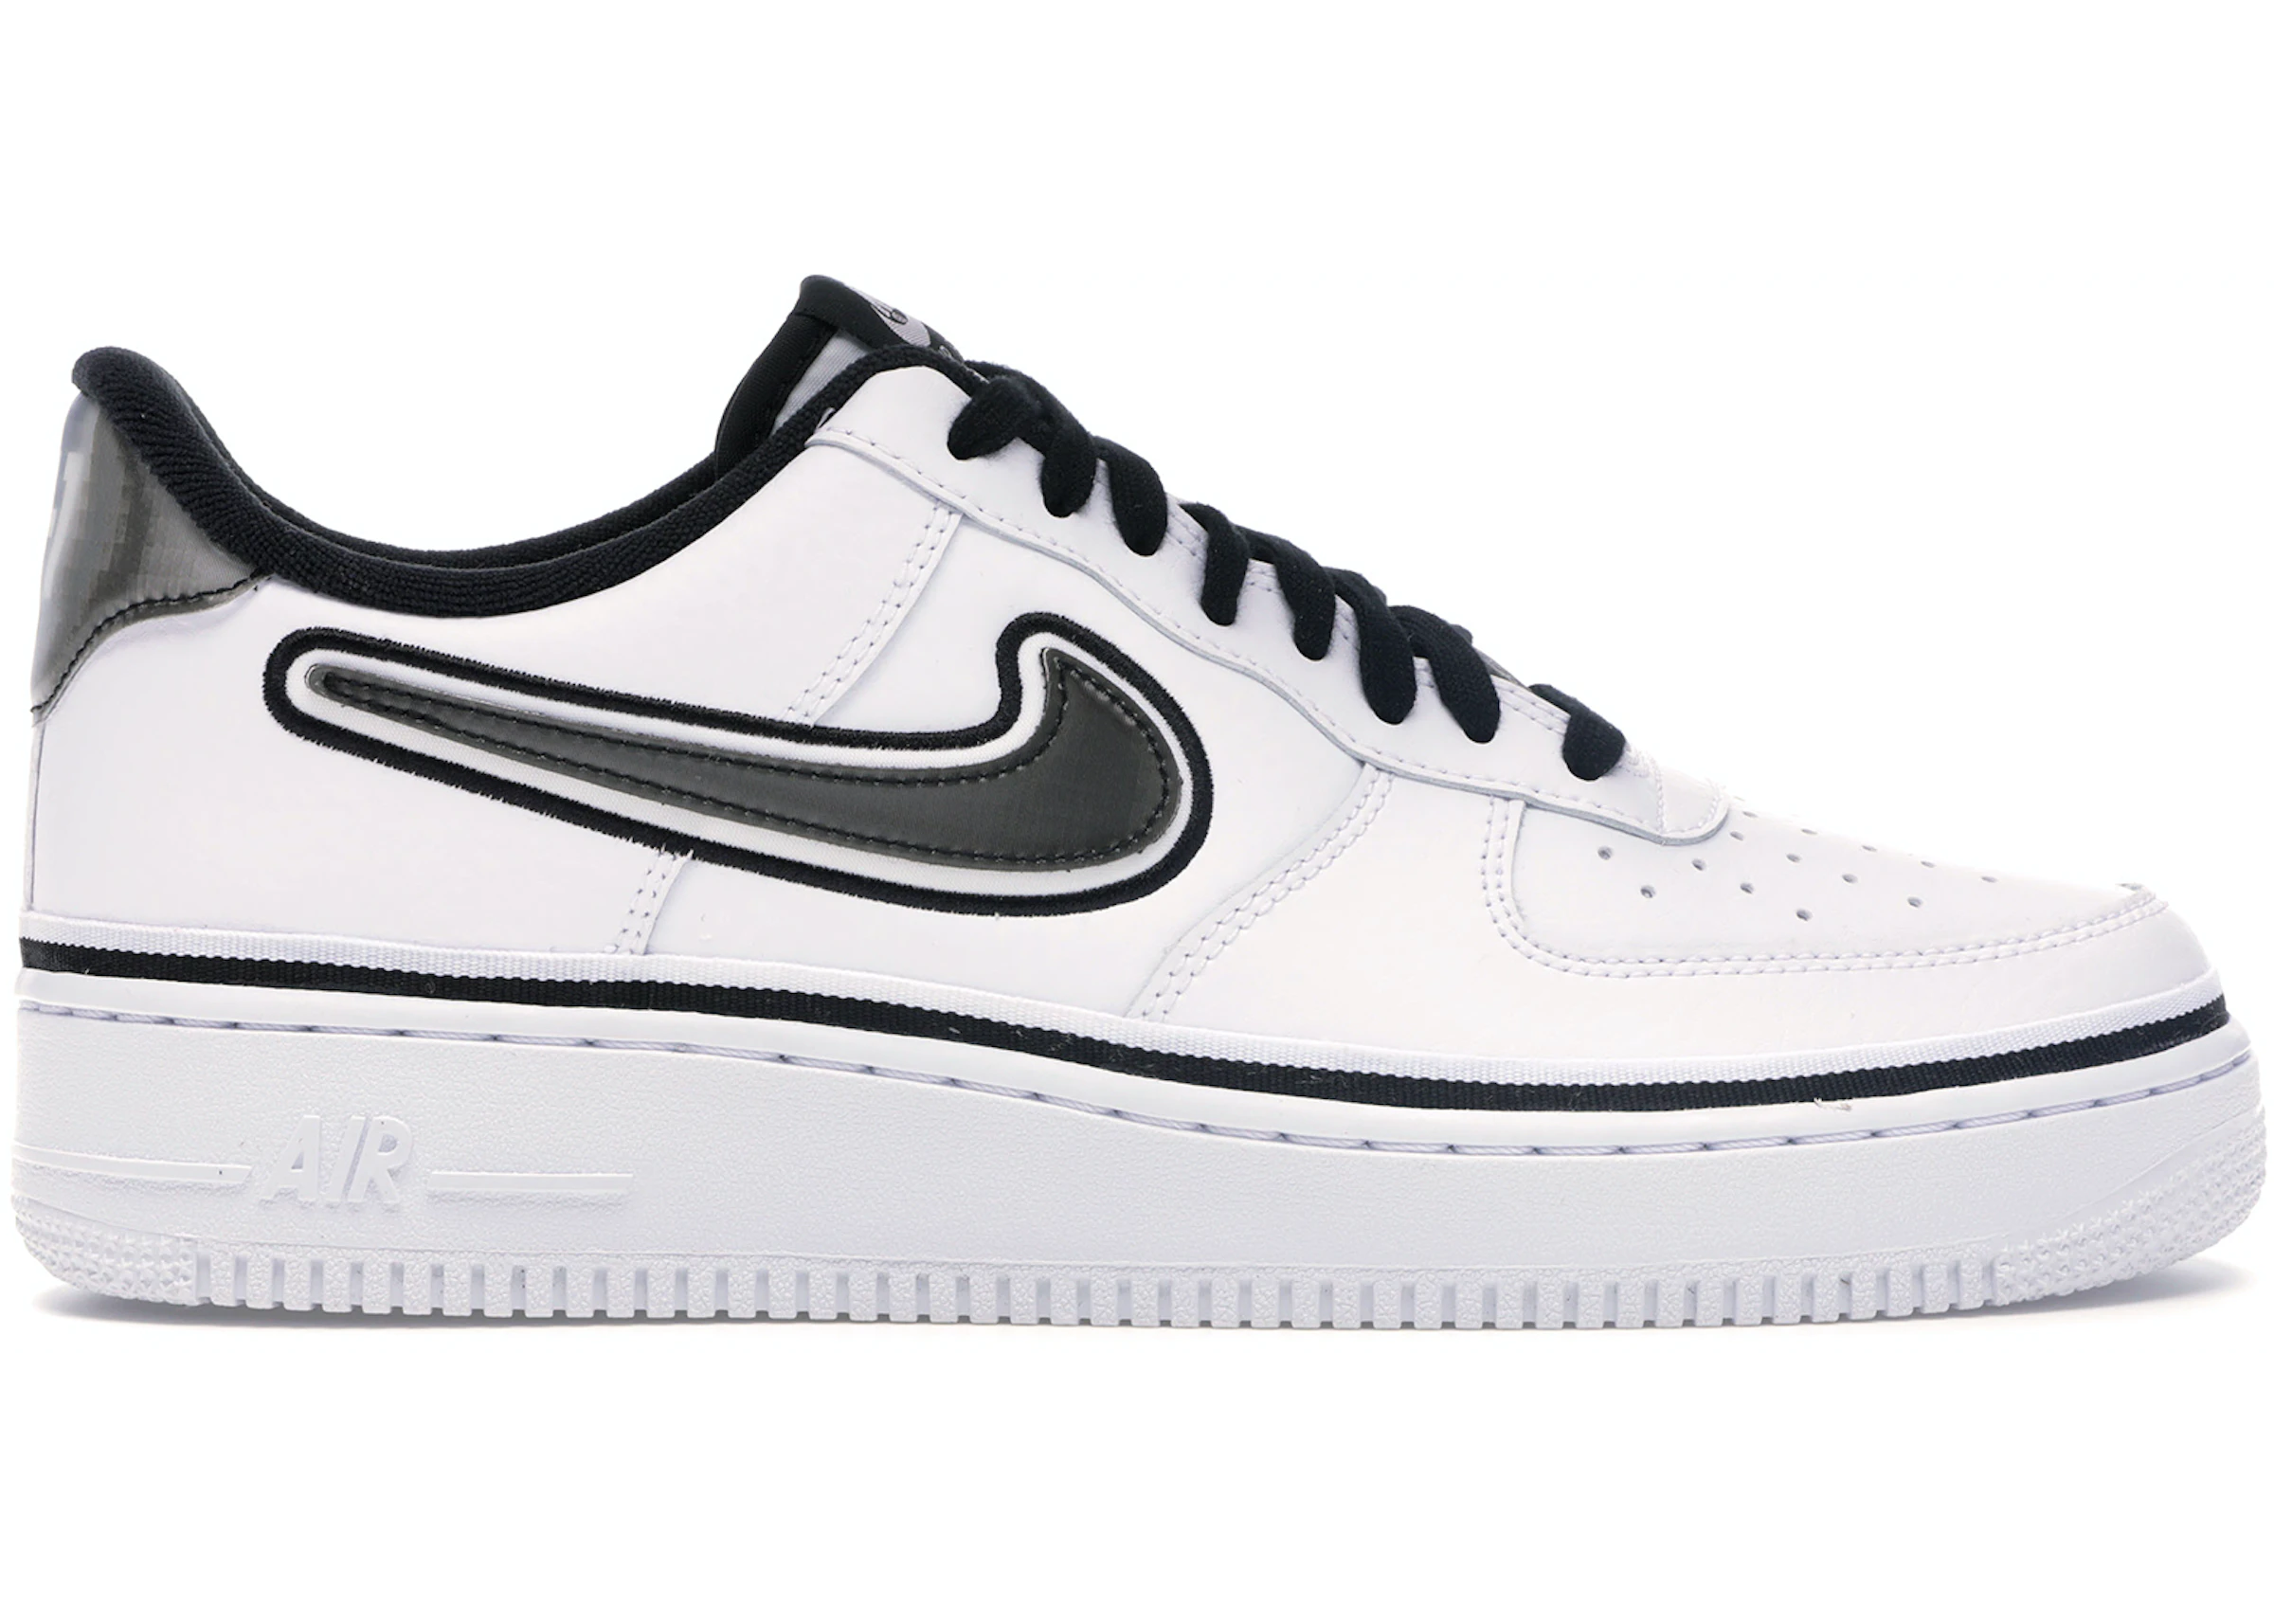 Honest There wrench Nike Air Force 1 Low Sport NBA White Black - AJ7748-100 - US